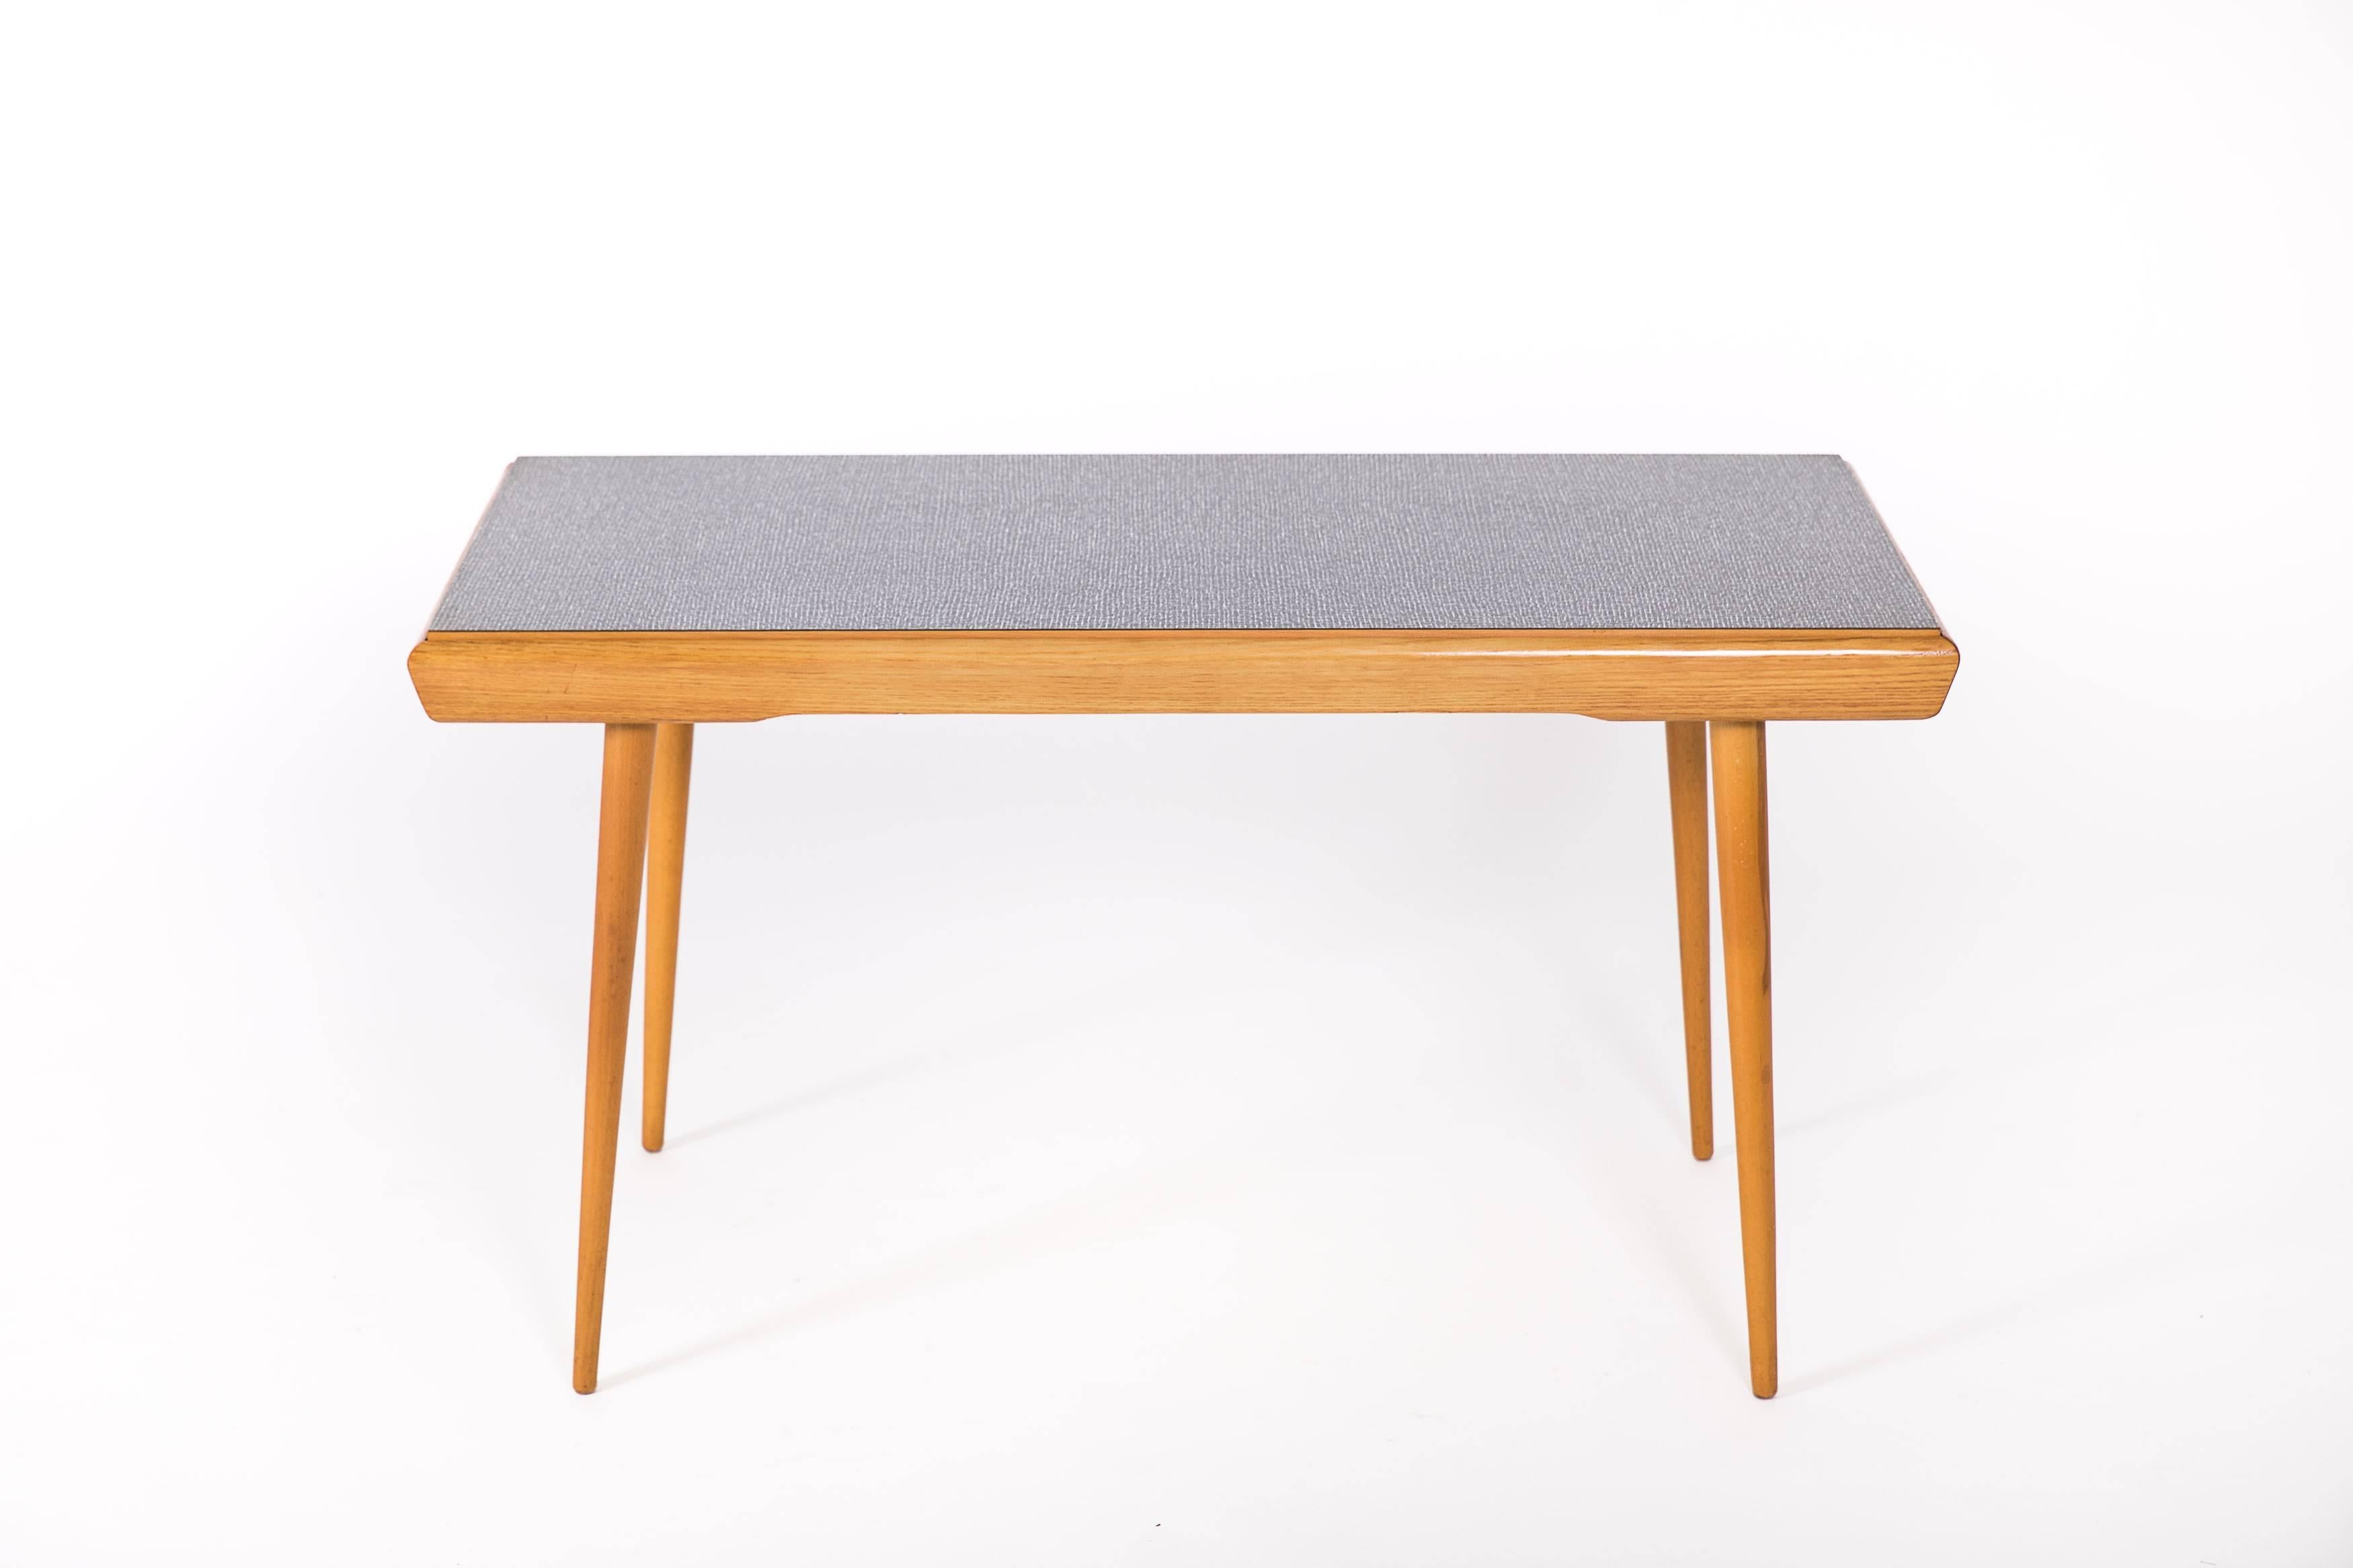 Coffee table with interchangeable top from Formica in a nice bright yellow and grey striped pattern. Solid oak frame and legs.